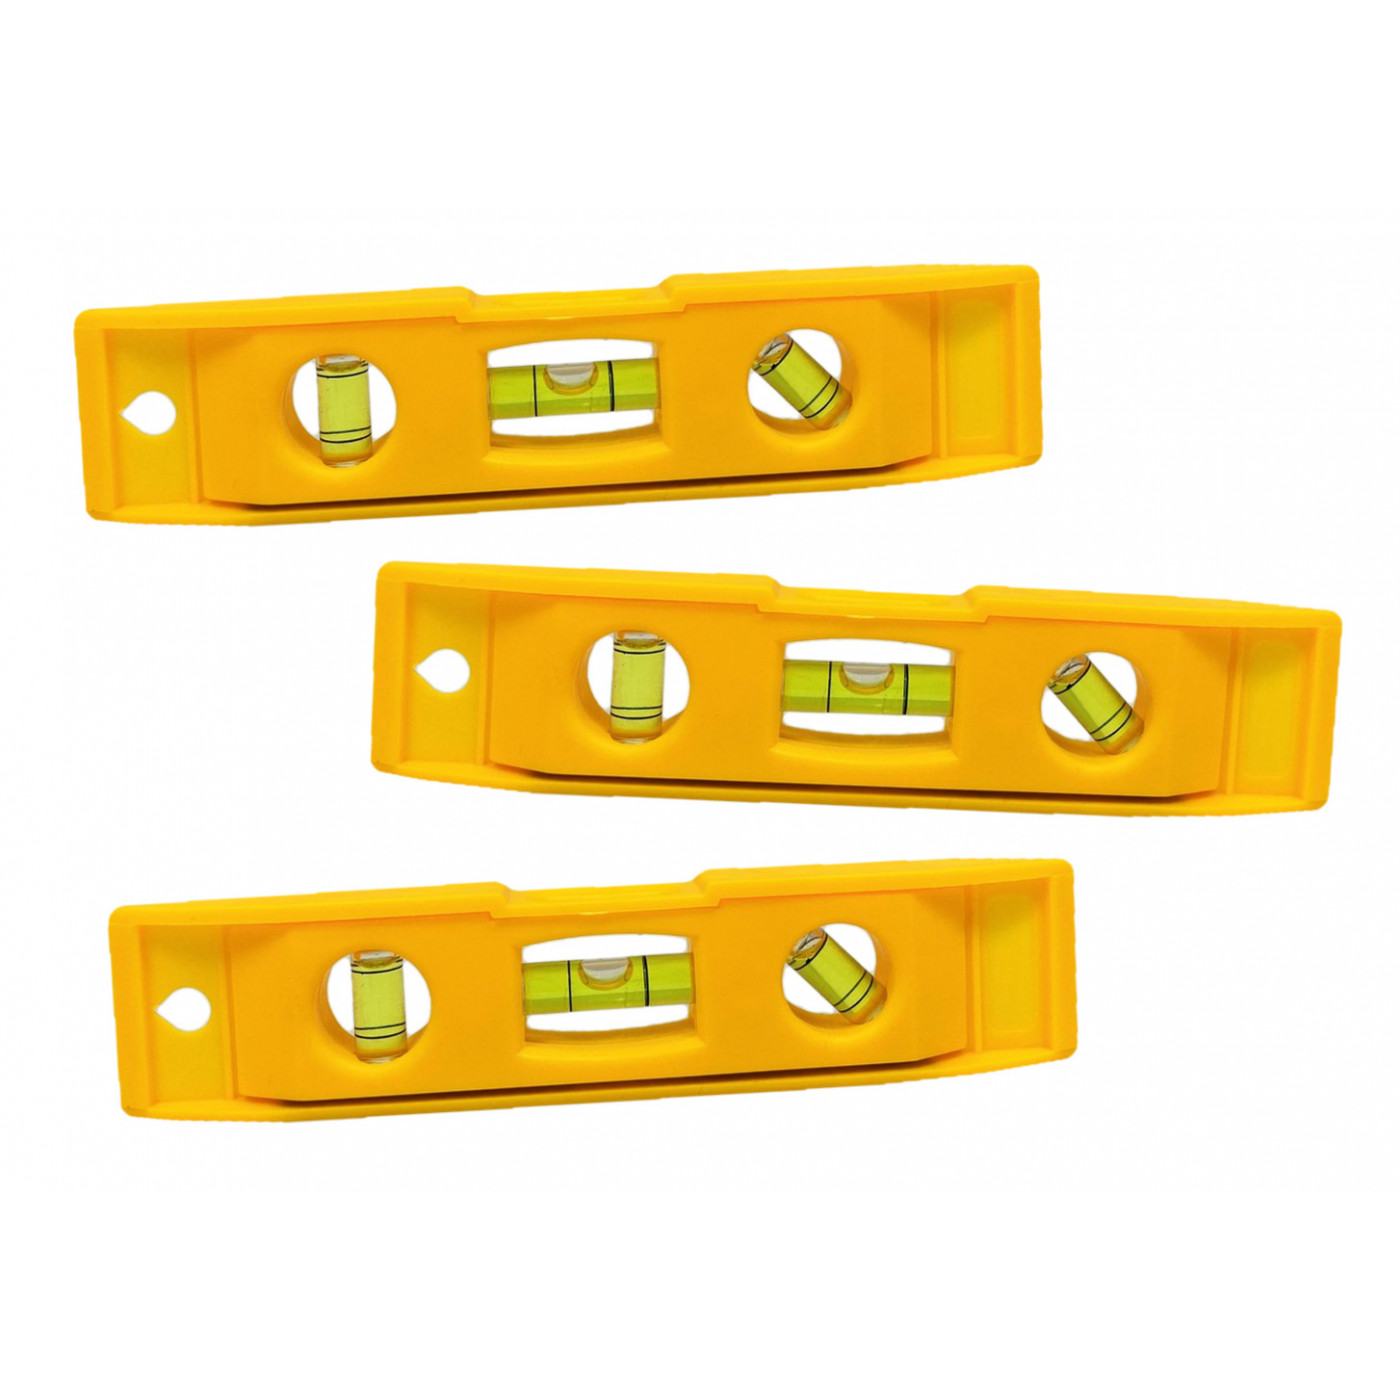 Set of 3 small plastic levels with magnet (yellow)